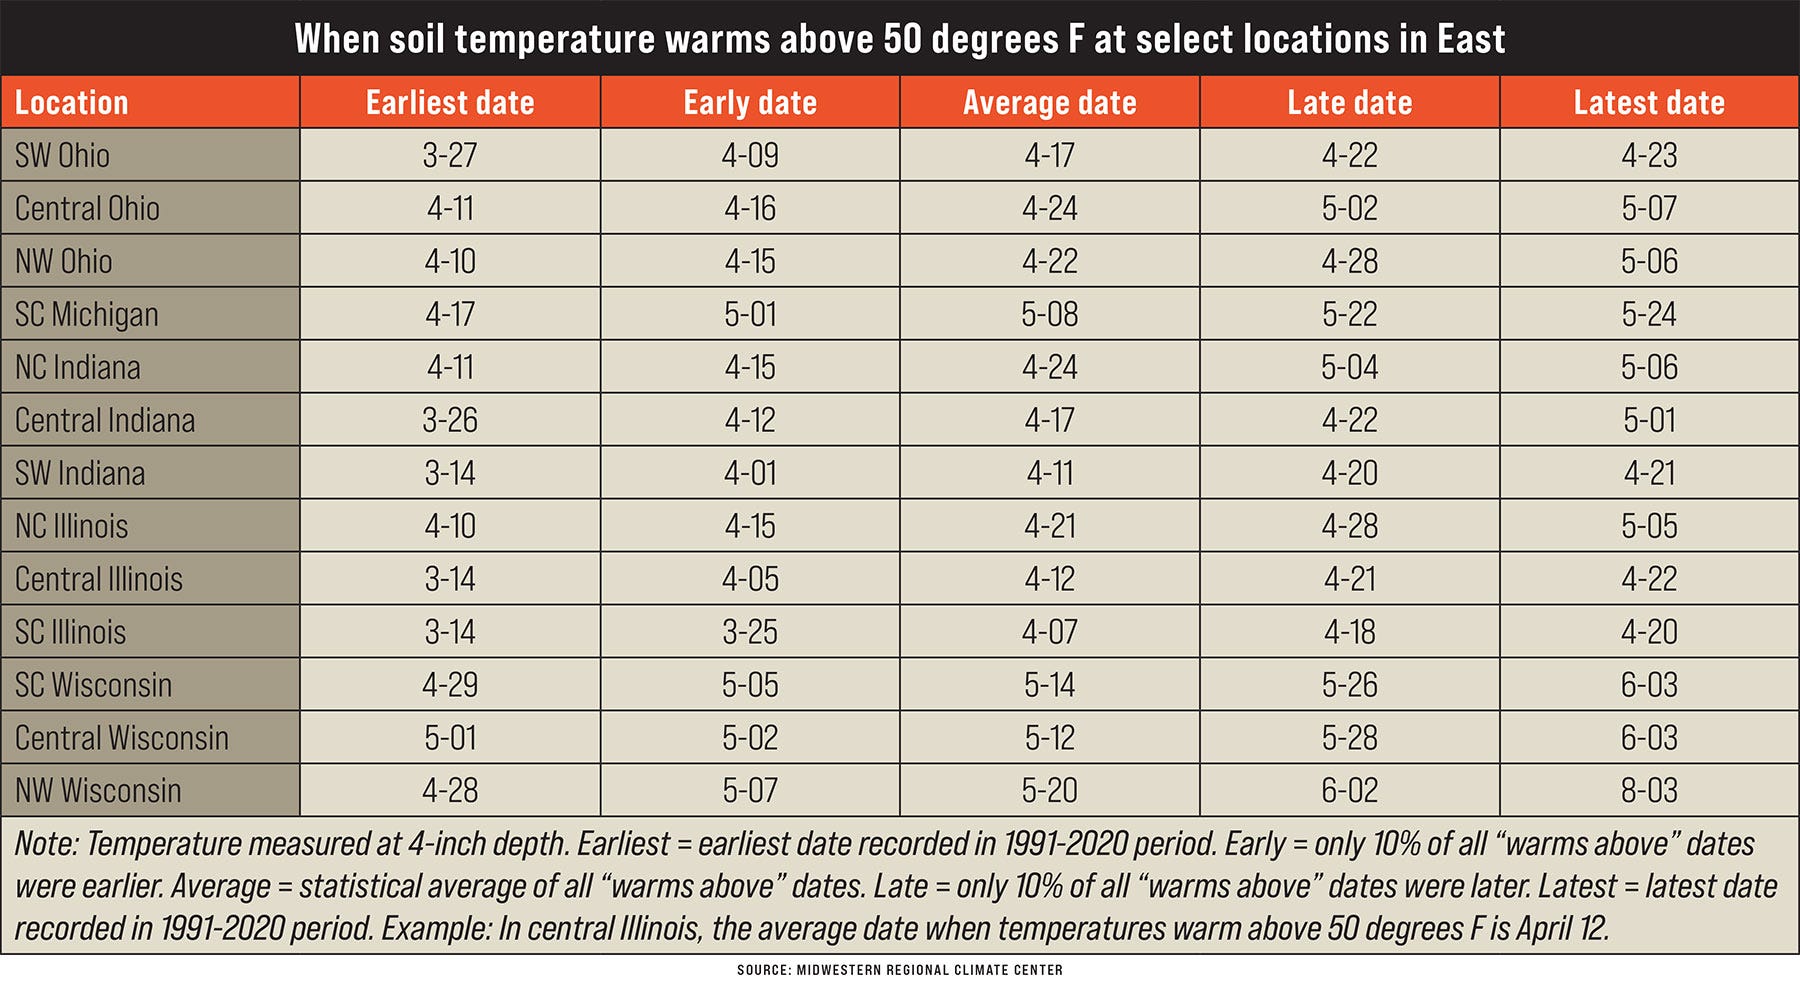 A graphic table detailing when soil temperature warms above 50 degrees F at select locations in East